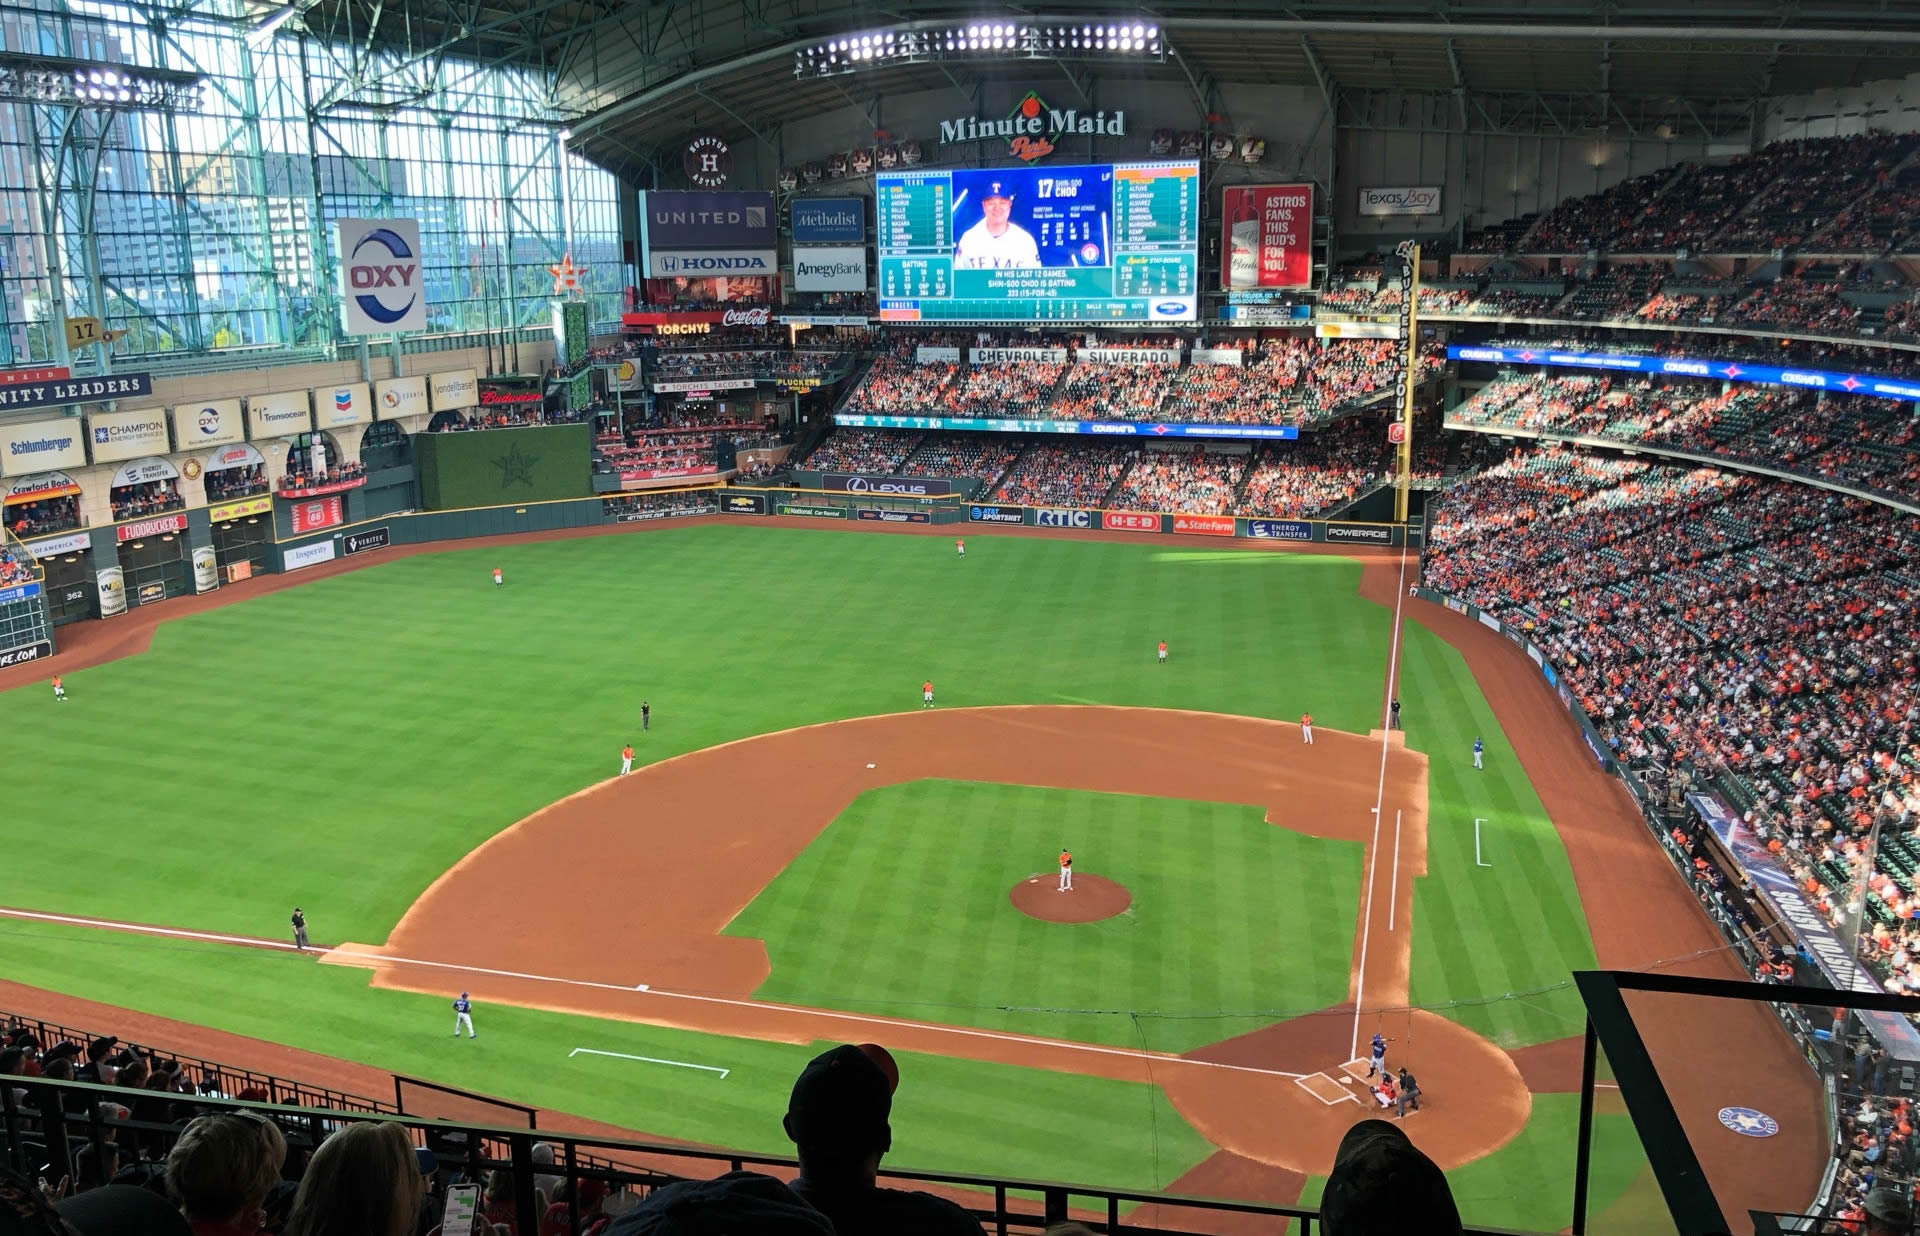 Minute Maid Park Seating 